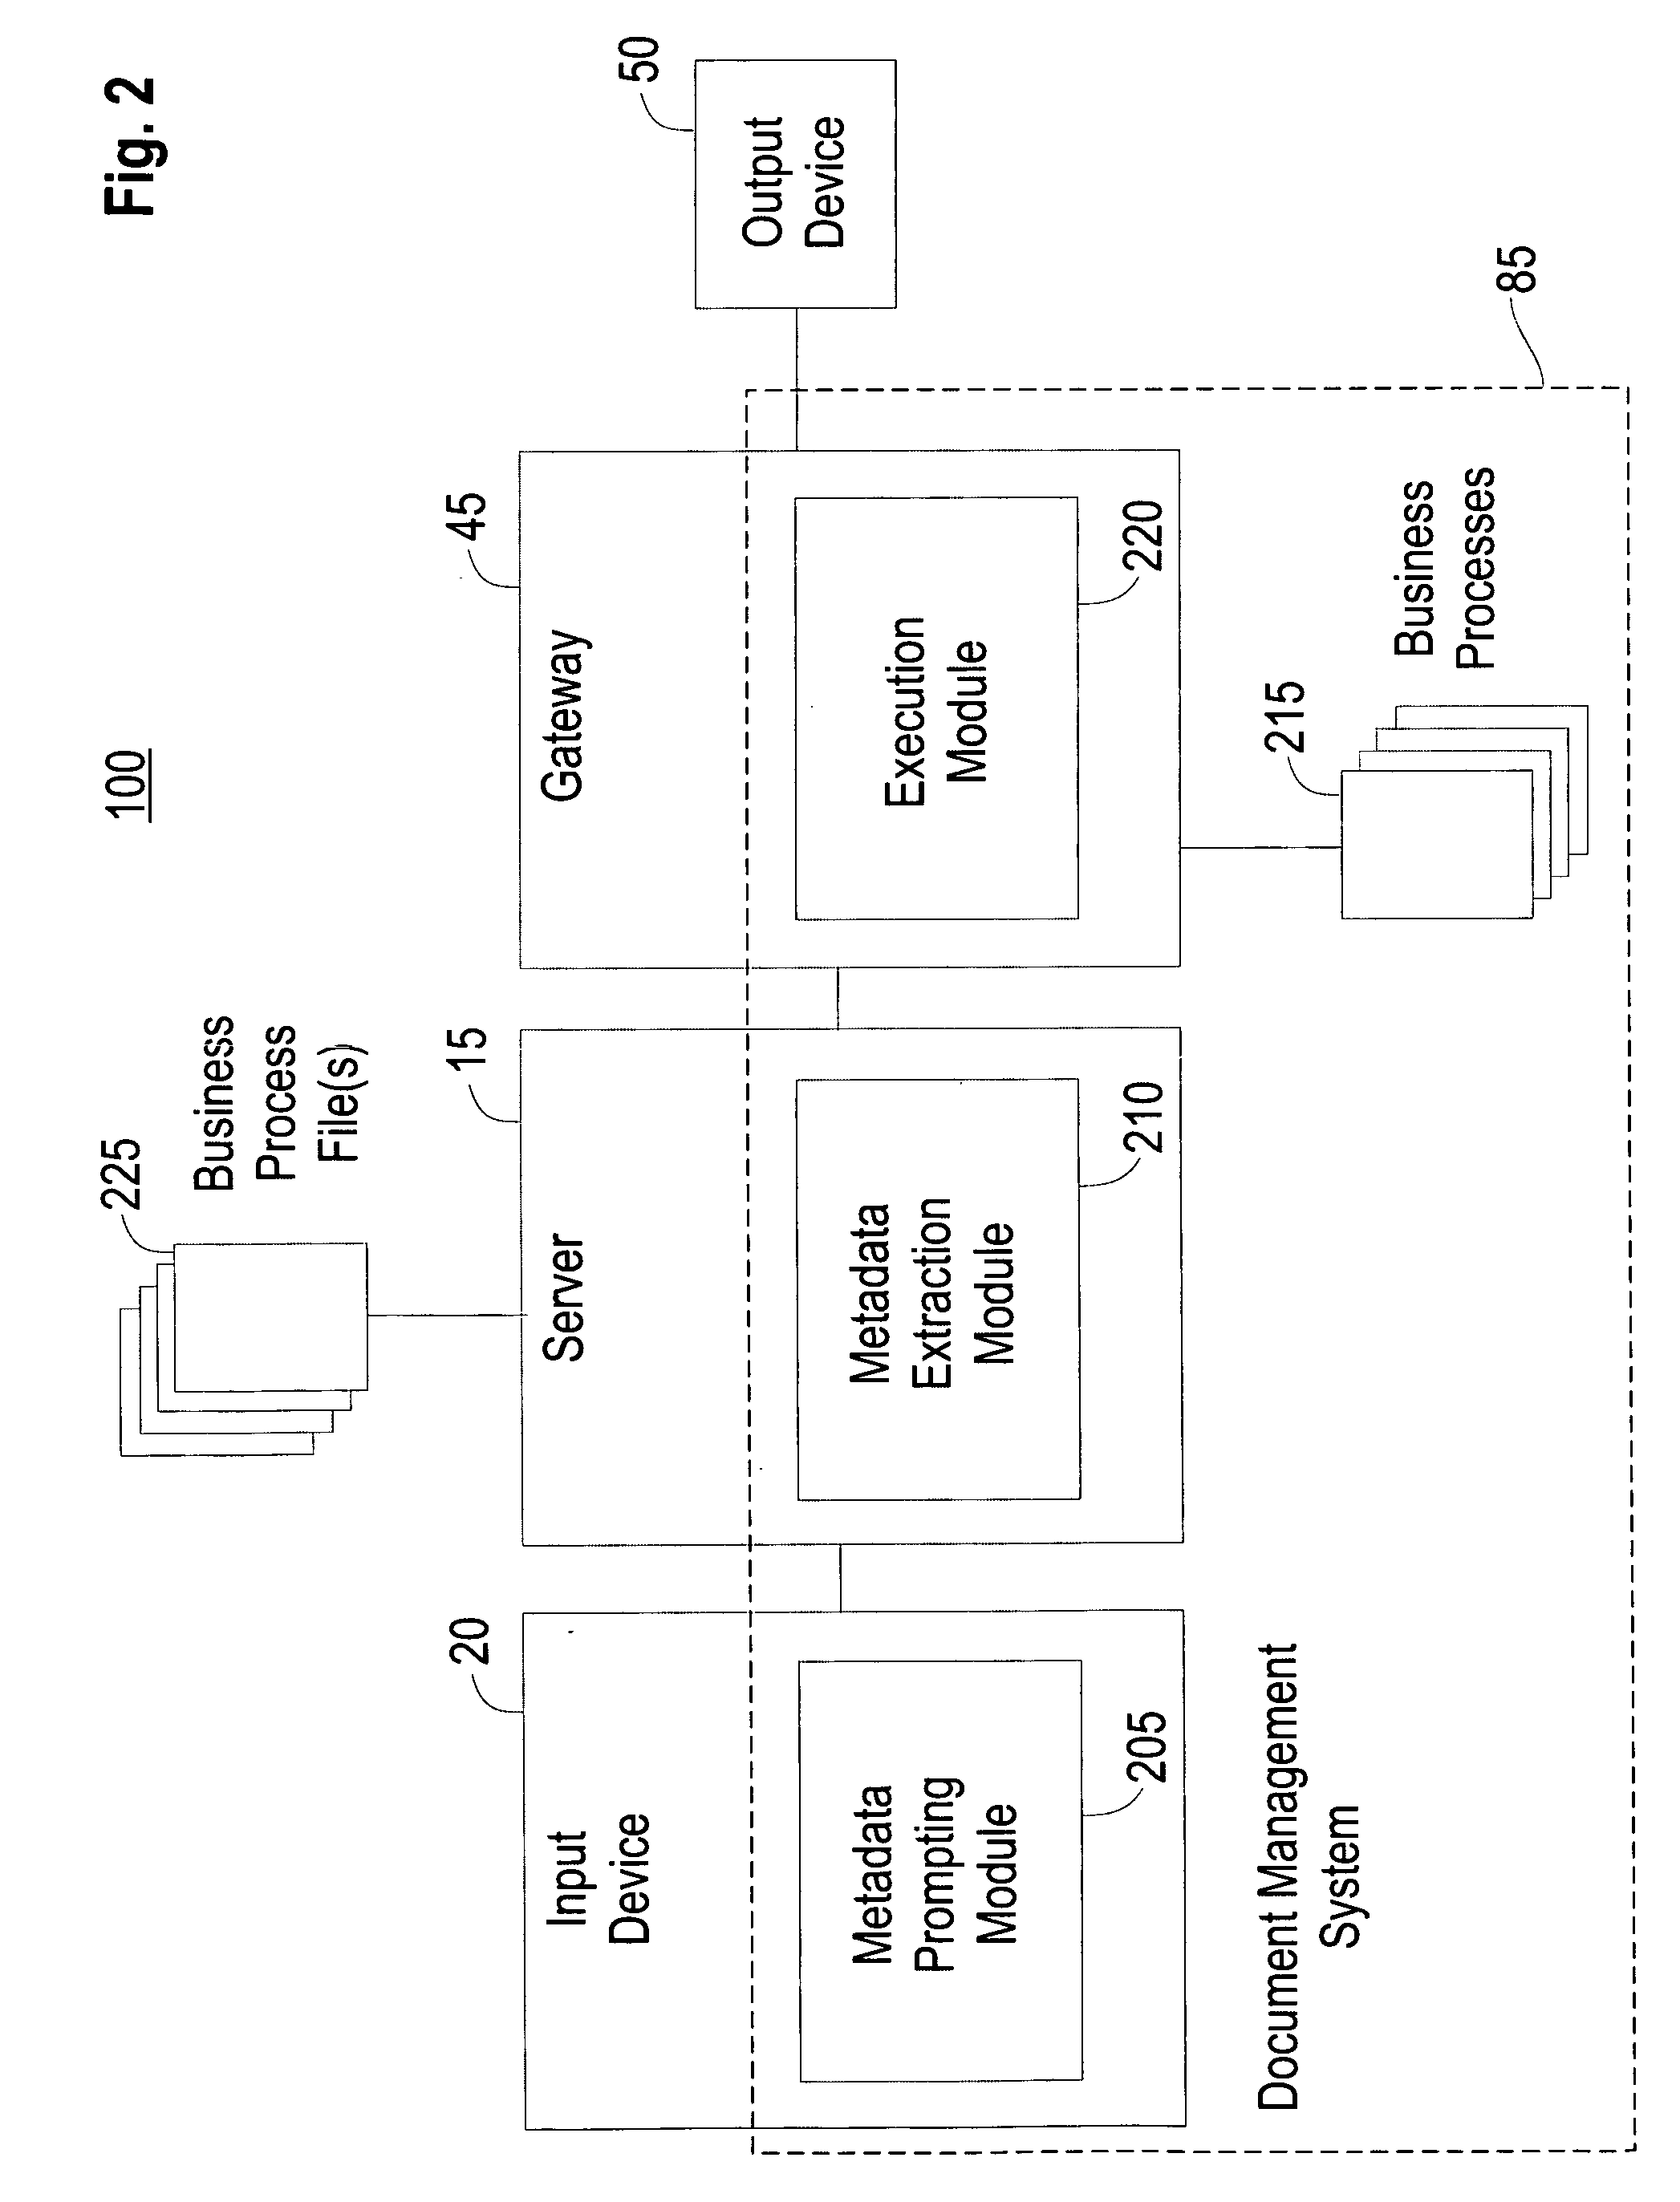 System and method for defining and generating document management applications for model-driven document management